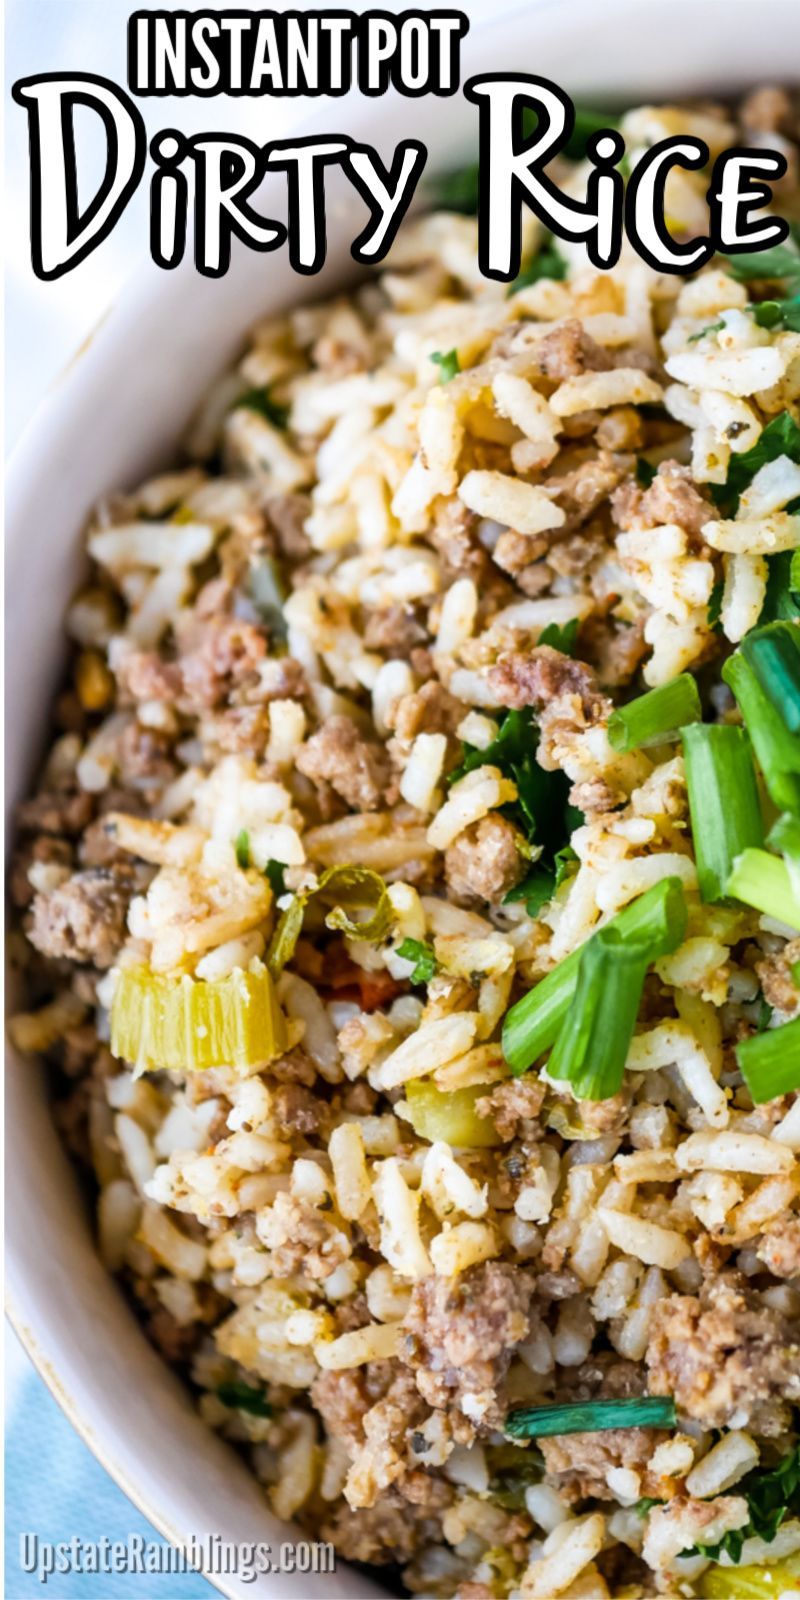 Instant Pot Dirty Rice - Easy Ground Beef & Rice recipe -   19 dinner recipes with ground beef quick ideas